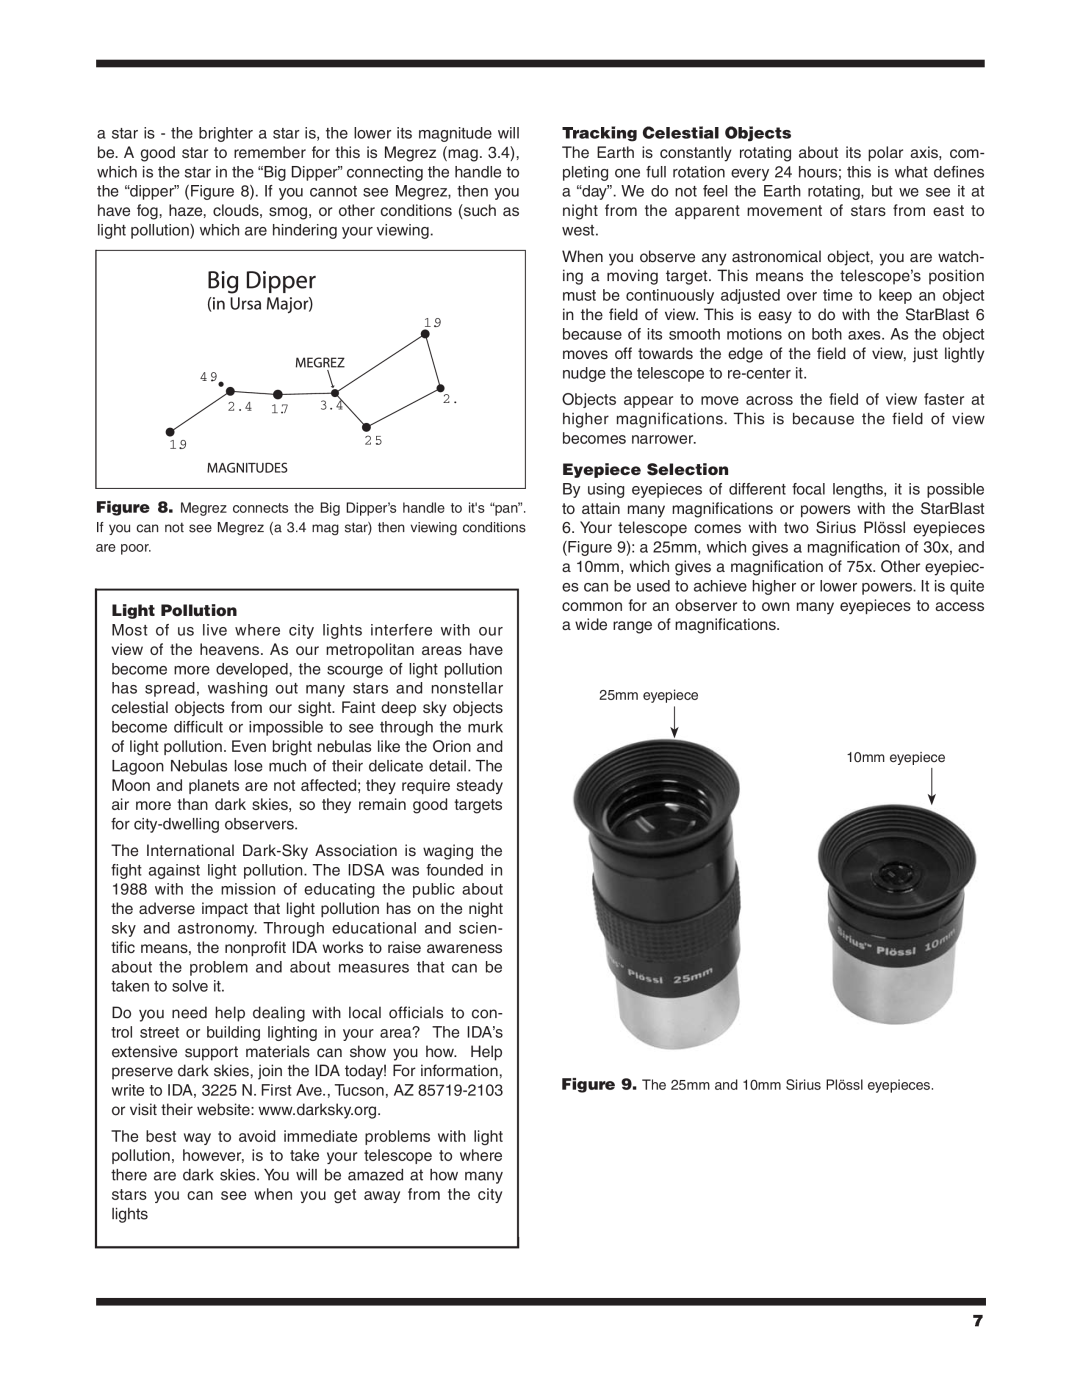 Orion 9964 instruction manual Light Pollution, Tracking Celestial Objects, Eyepiece Selection, 25mm eyepiece 10mm eyepiece 